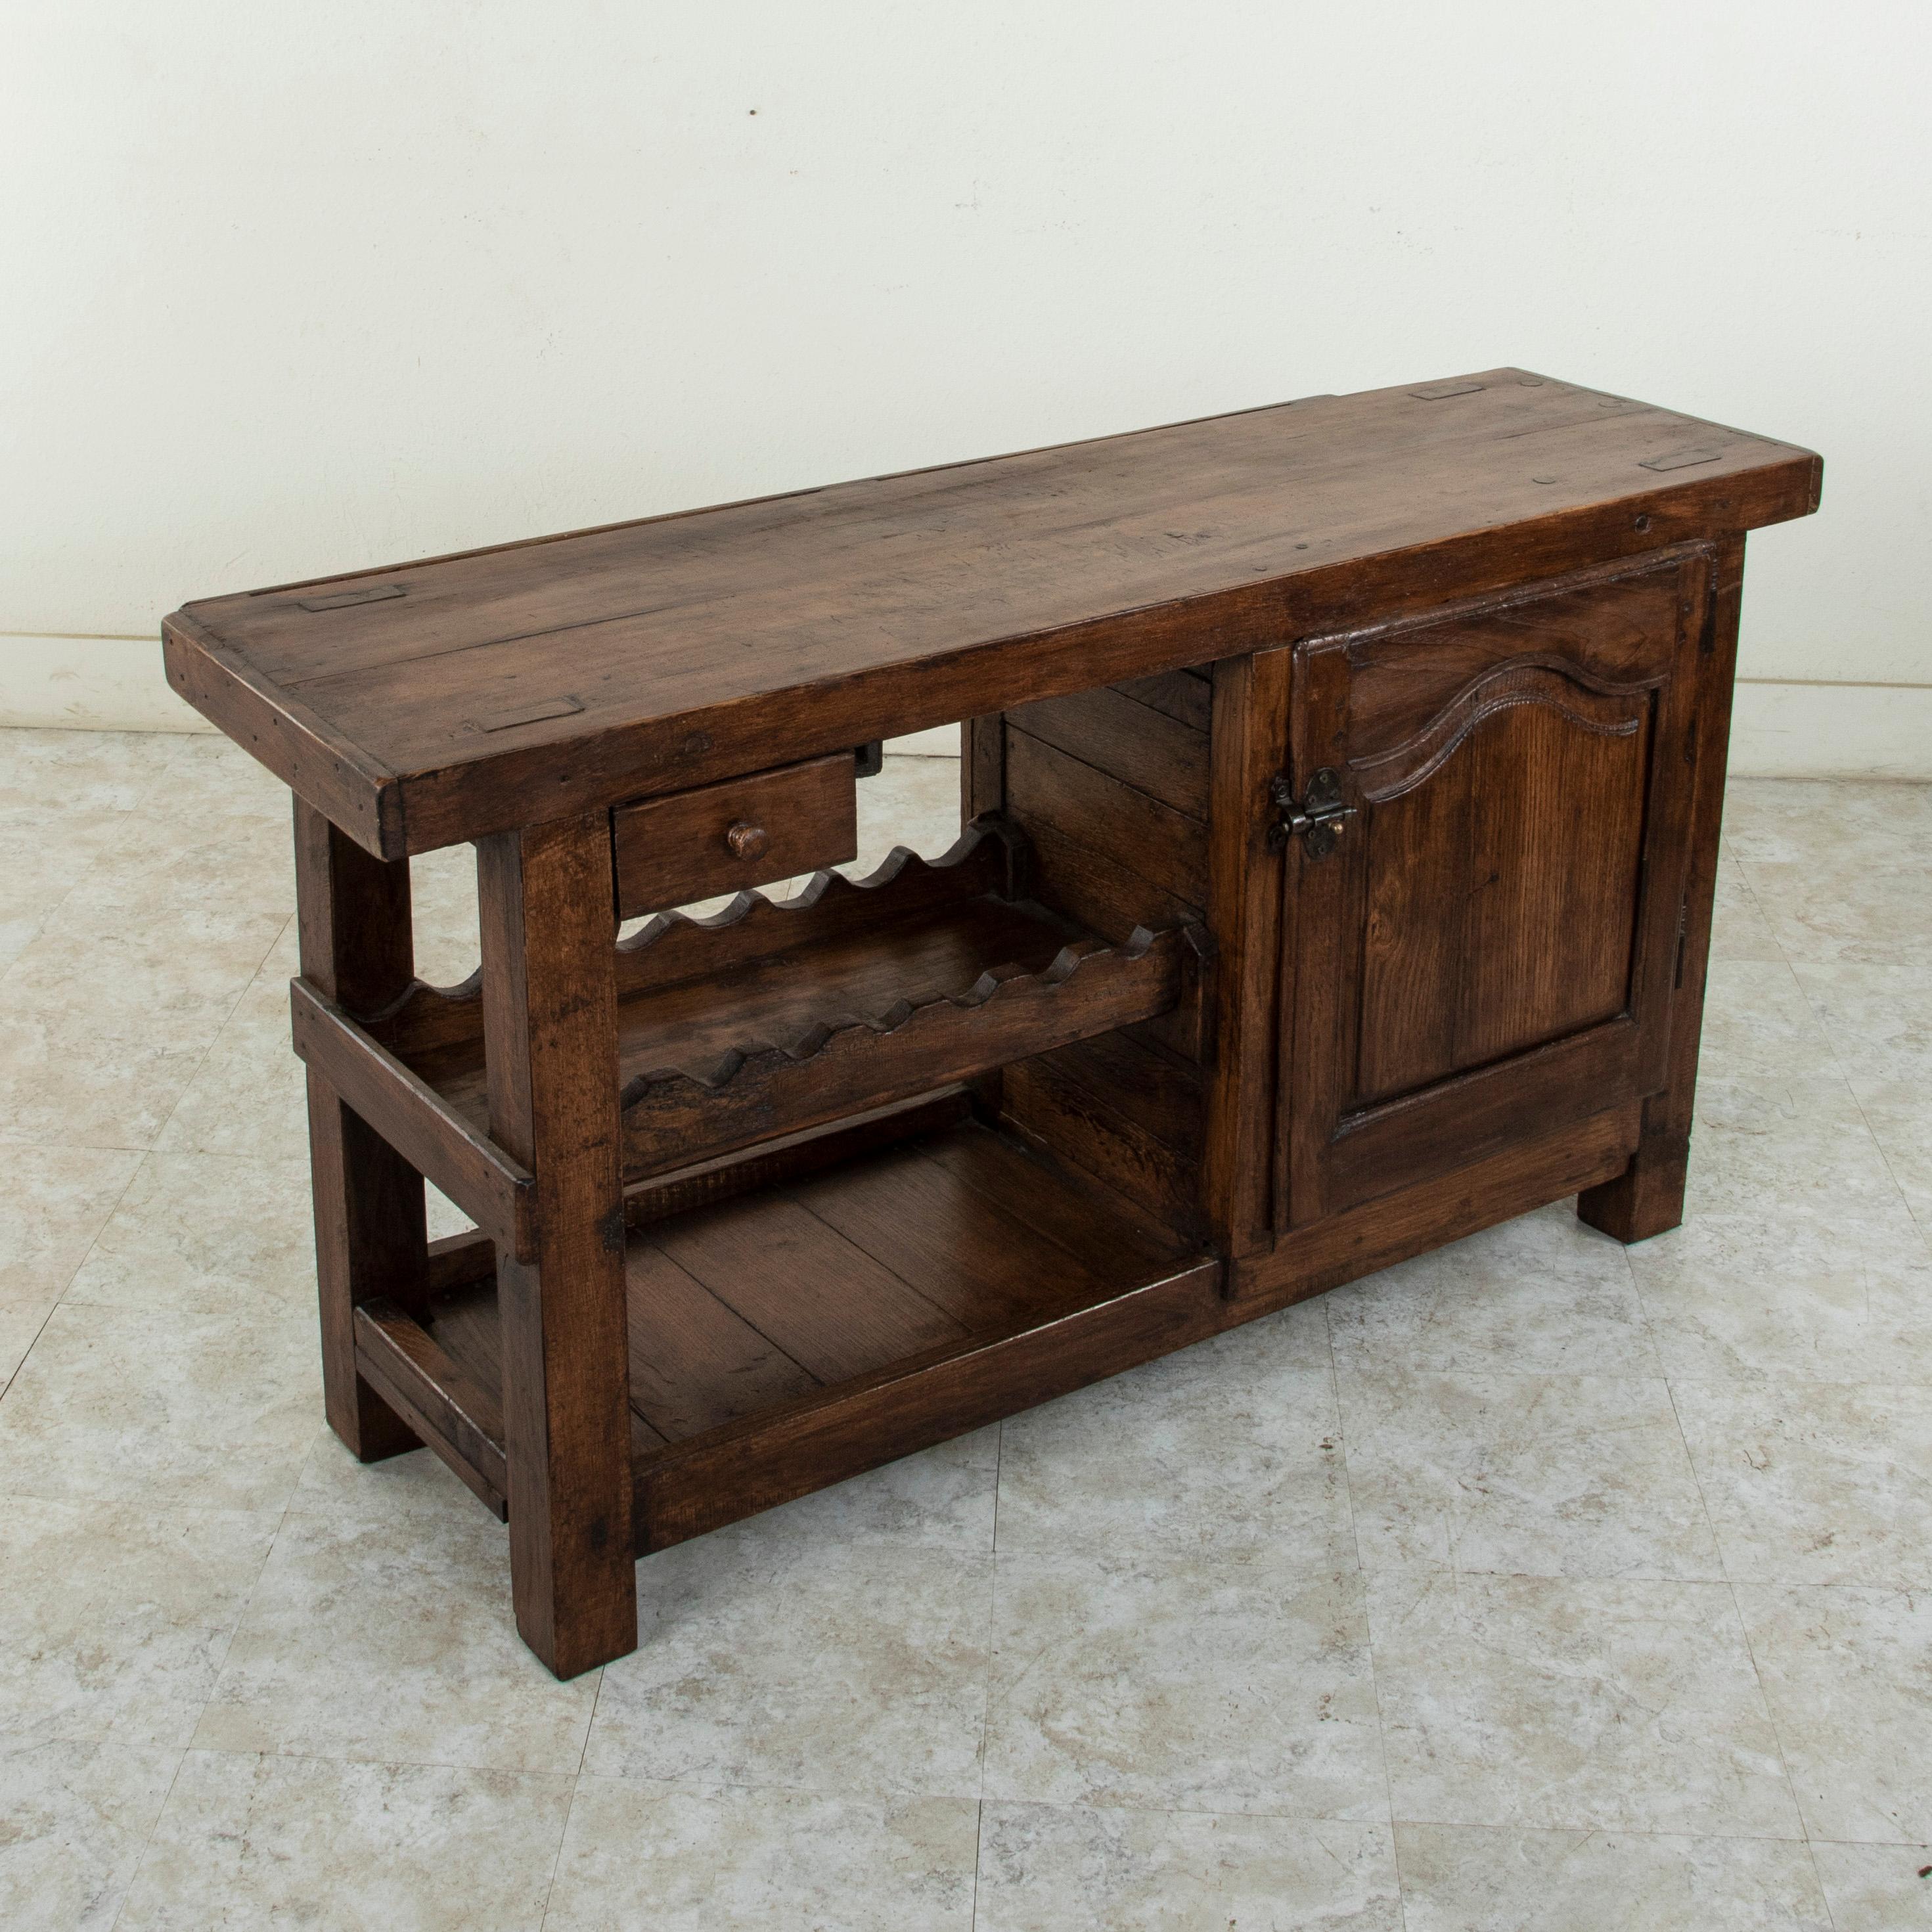 This early twentieth century French oak workbench is from the region of Normandy, France. Two slots at the back of the top once kept the artisan's tools close at hand. Its closed cabinet with single interior shelf, single drawer, and lower shelf